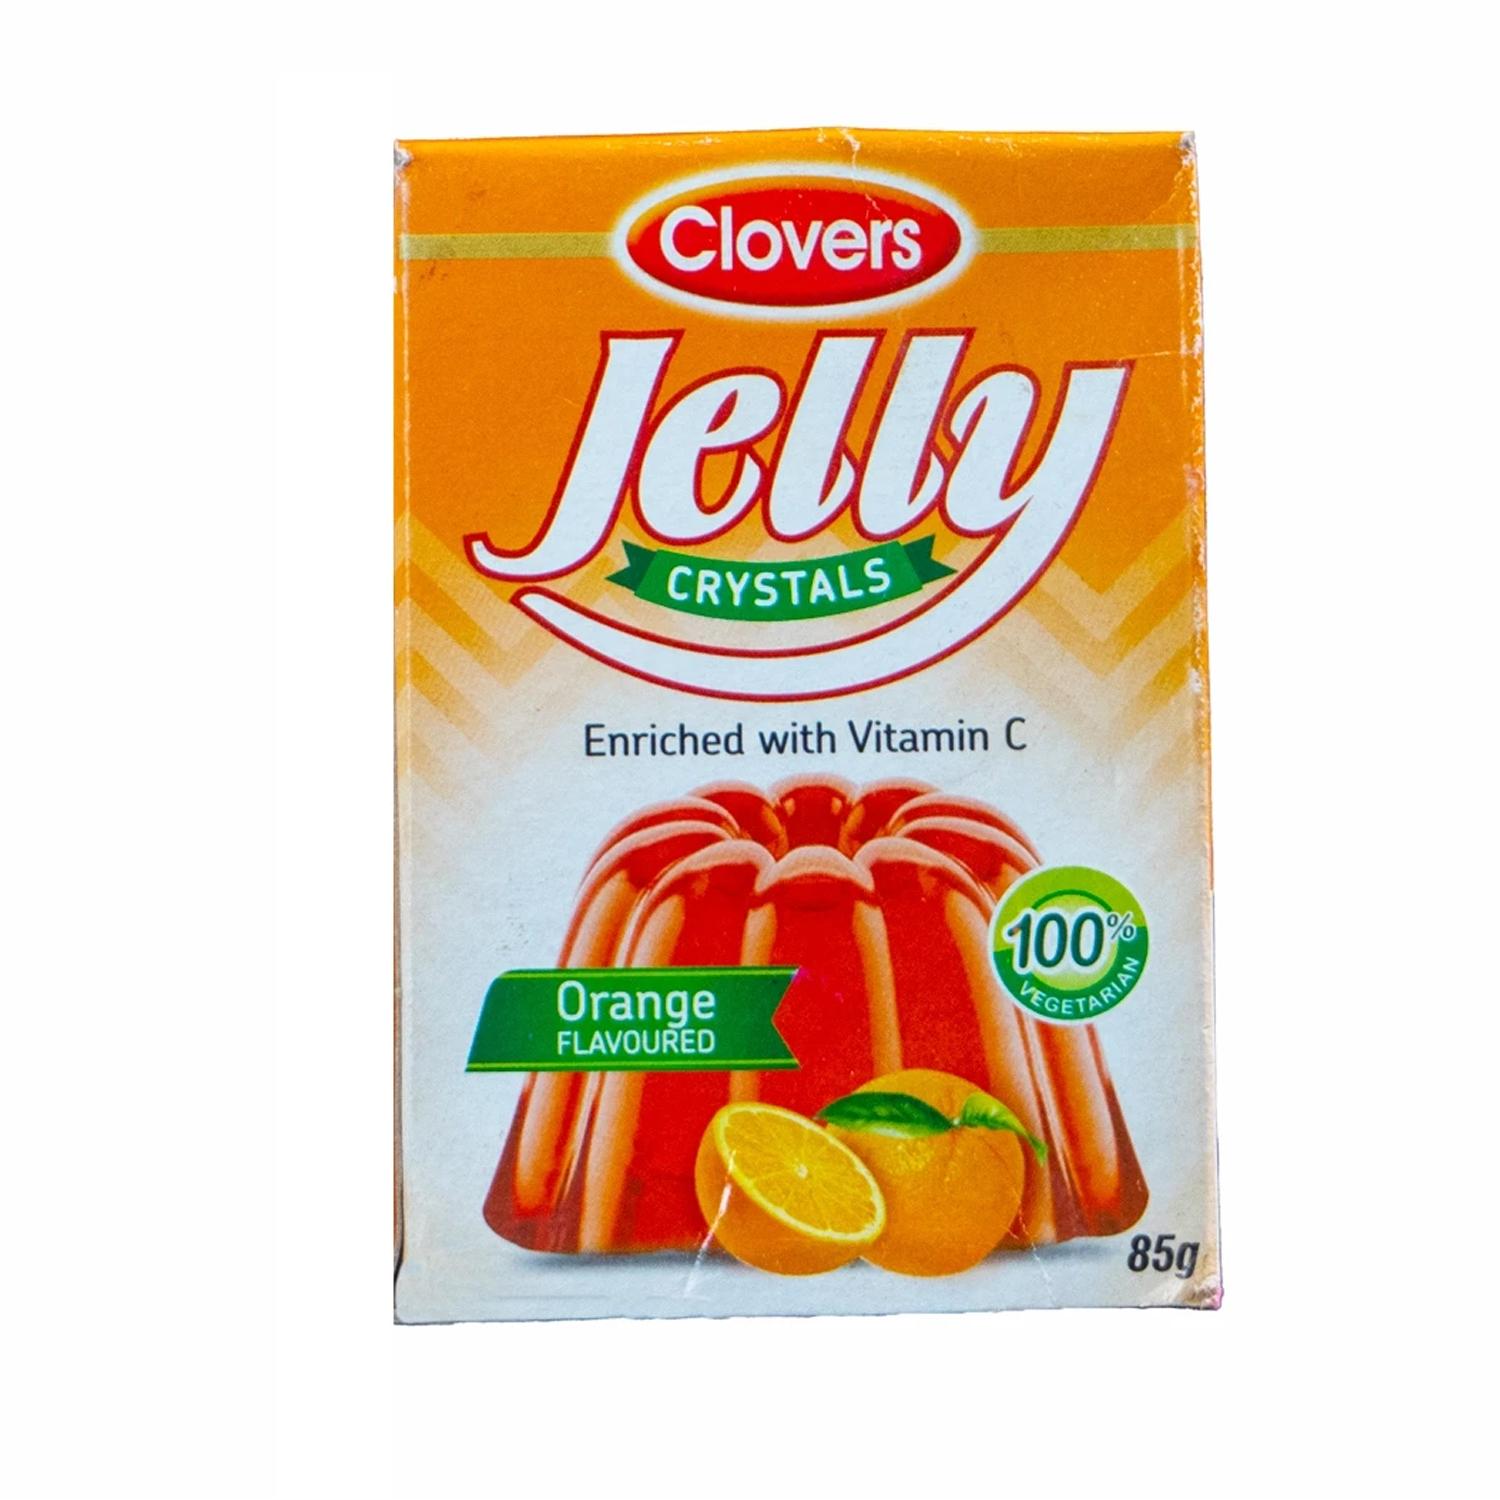 CLOVERS JELLY CRYSTALS ORANGE 85GMS